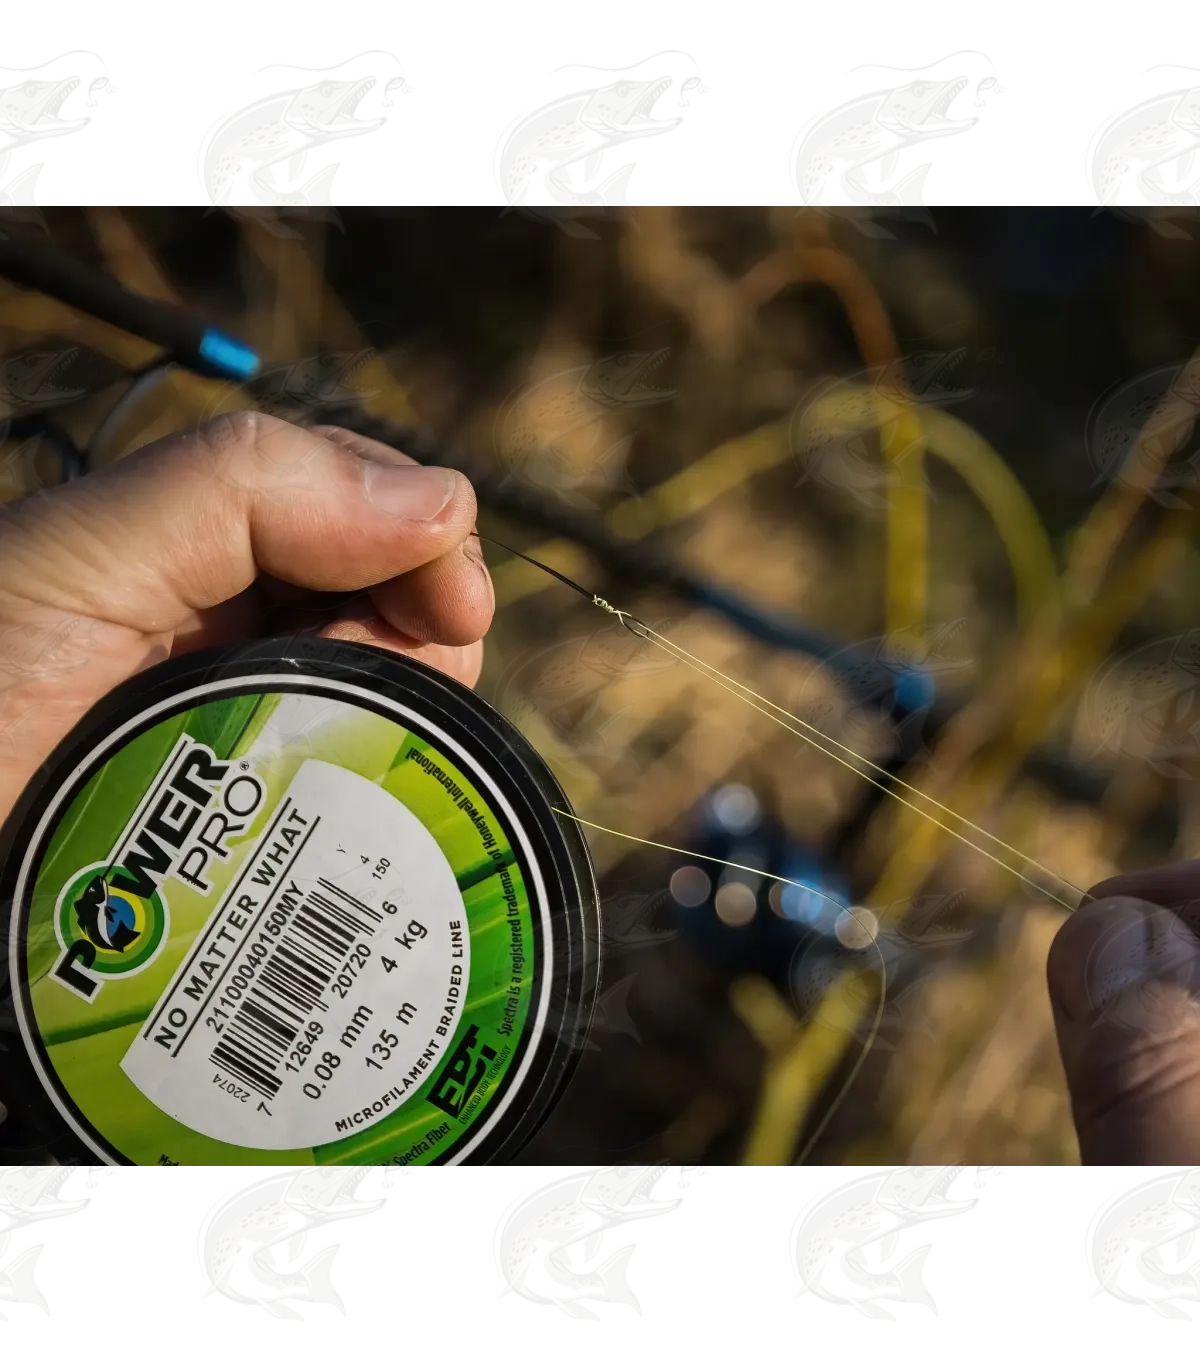 Power Pro Spectra White Braided Line — Discount Tackle